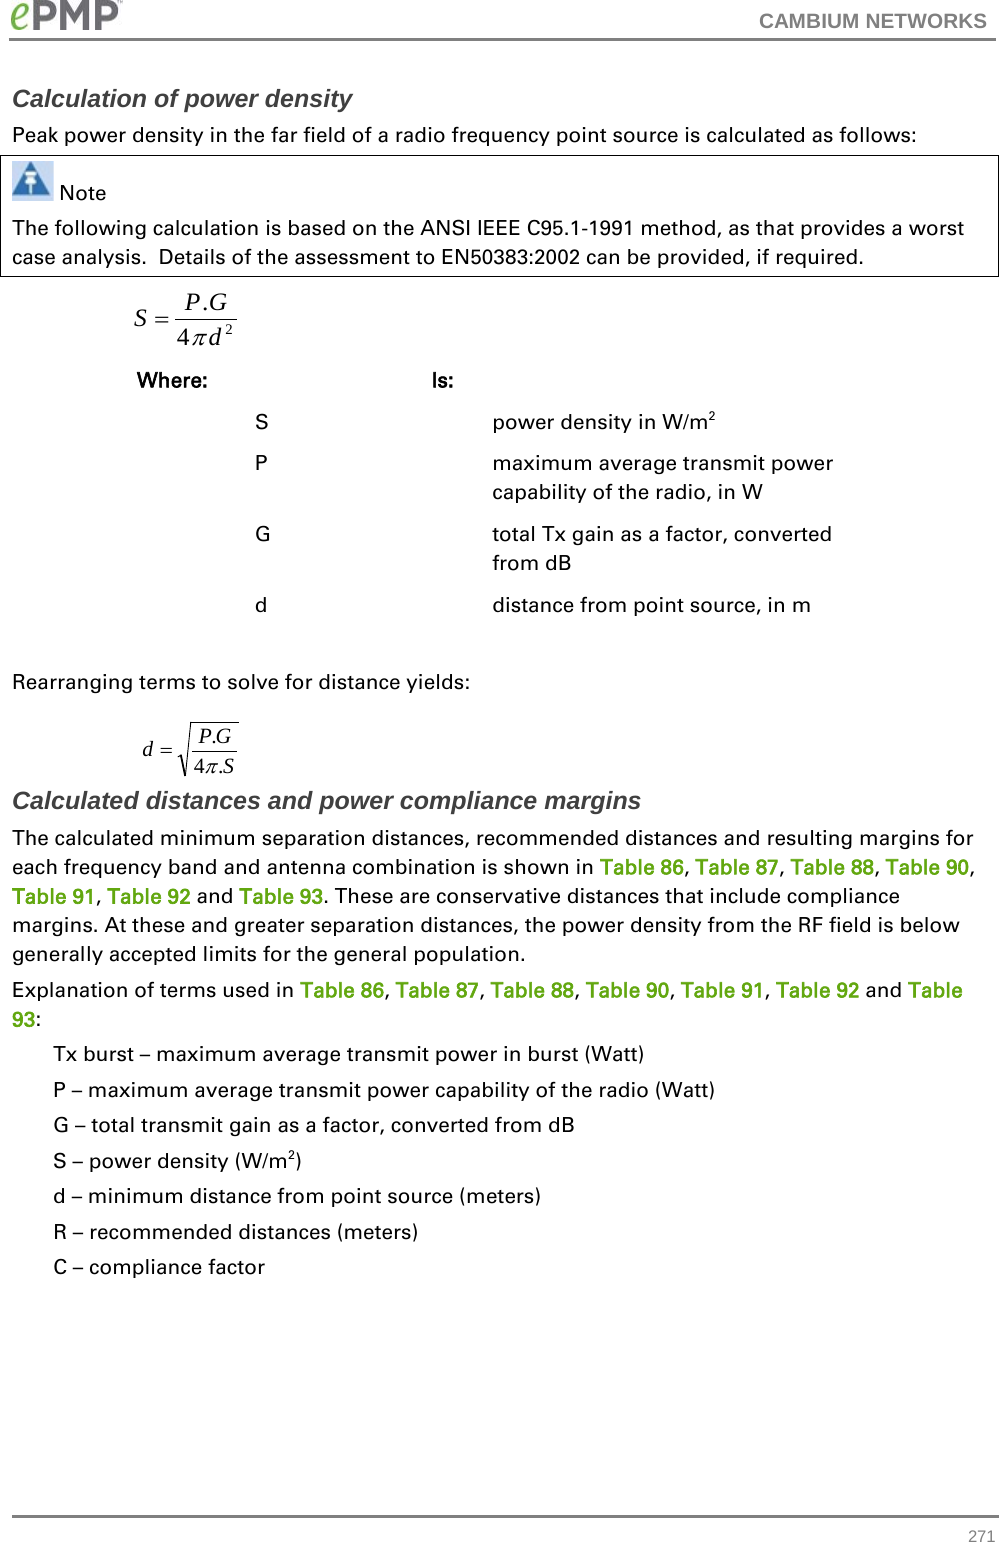 CAMBIUM NETWORKS  Calculation of power density Peak power density in the far field of a radio frequency point source is calculated as follows:  Note The following calculation is based on the ANSI IEEE C95.1-1991 method, as that provides a worst case analysis.  Details of the assessment to EN50383:2002 can be provided, if required.    Where:  Is:    S    power density in W/m2   P    maximum average transmit power capability of the radio, in W   G    total Tx gain as a factor, converted from dB   d    distance from point source, in m  Rearranging terms to solve for distance yields:   Calculated distances and power compliance margins The calculated minimum separation distances, recommended distances and resulting margins for each frequency band and antenna combination is shown in Table 86, Table 87, Table 88, Table 90, Table 91, Table 92 and Table 93. These are conservative distances that include compliance margins. At these and greater separation distances, the power density from the RF field is below generally accepted limits for the general population. Explanation of terms used in Table 86, Table 87, Table 88, Table 90, Table 91, Table 92 and Table 93: Tx burst – maximum average transmit power in burst (Watt) P – maximum average transmit power capability of the radio (Watt) G – total transmit gain as a factor, converted from dB S – power density (W/m2) d – minimum distance from point source (meters) R – recommended distances (meters) C – compliance factor    24.dGPSπ=SGPd.4.π= 271 